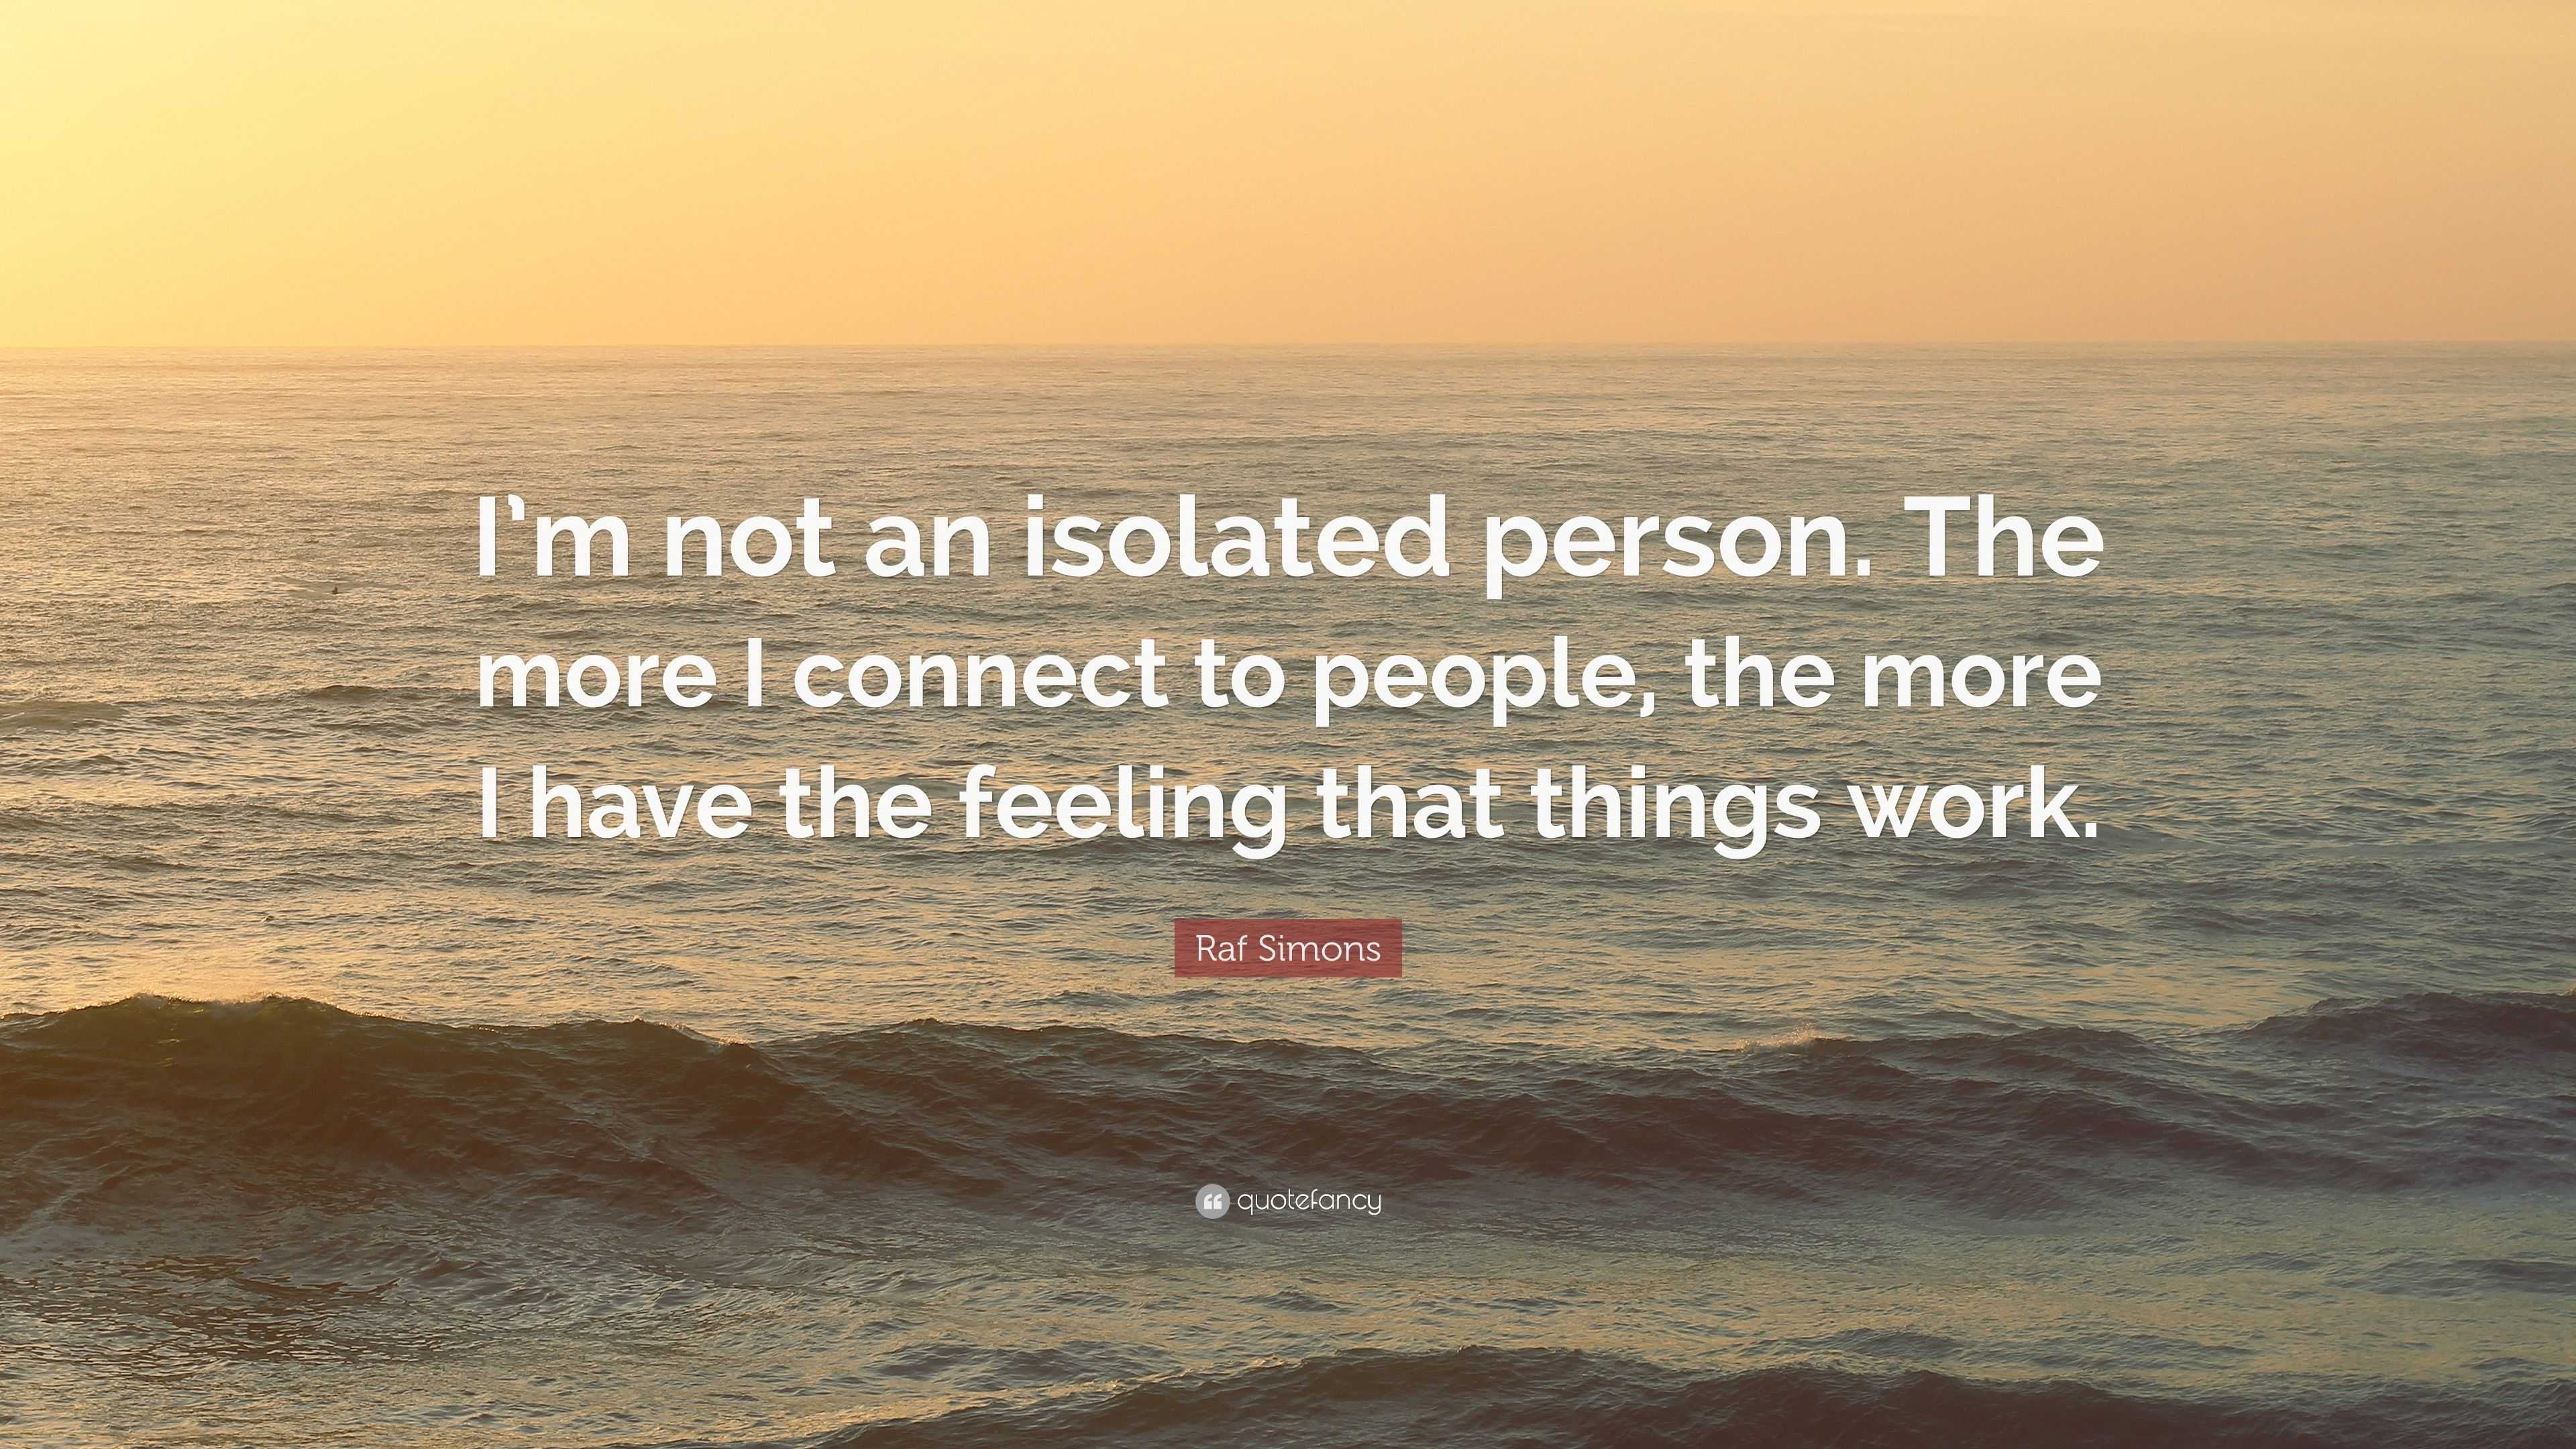 Raf Simons Quote: “I'm not an isolated person. The more I connect ...